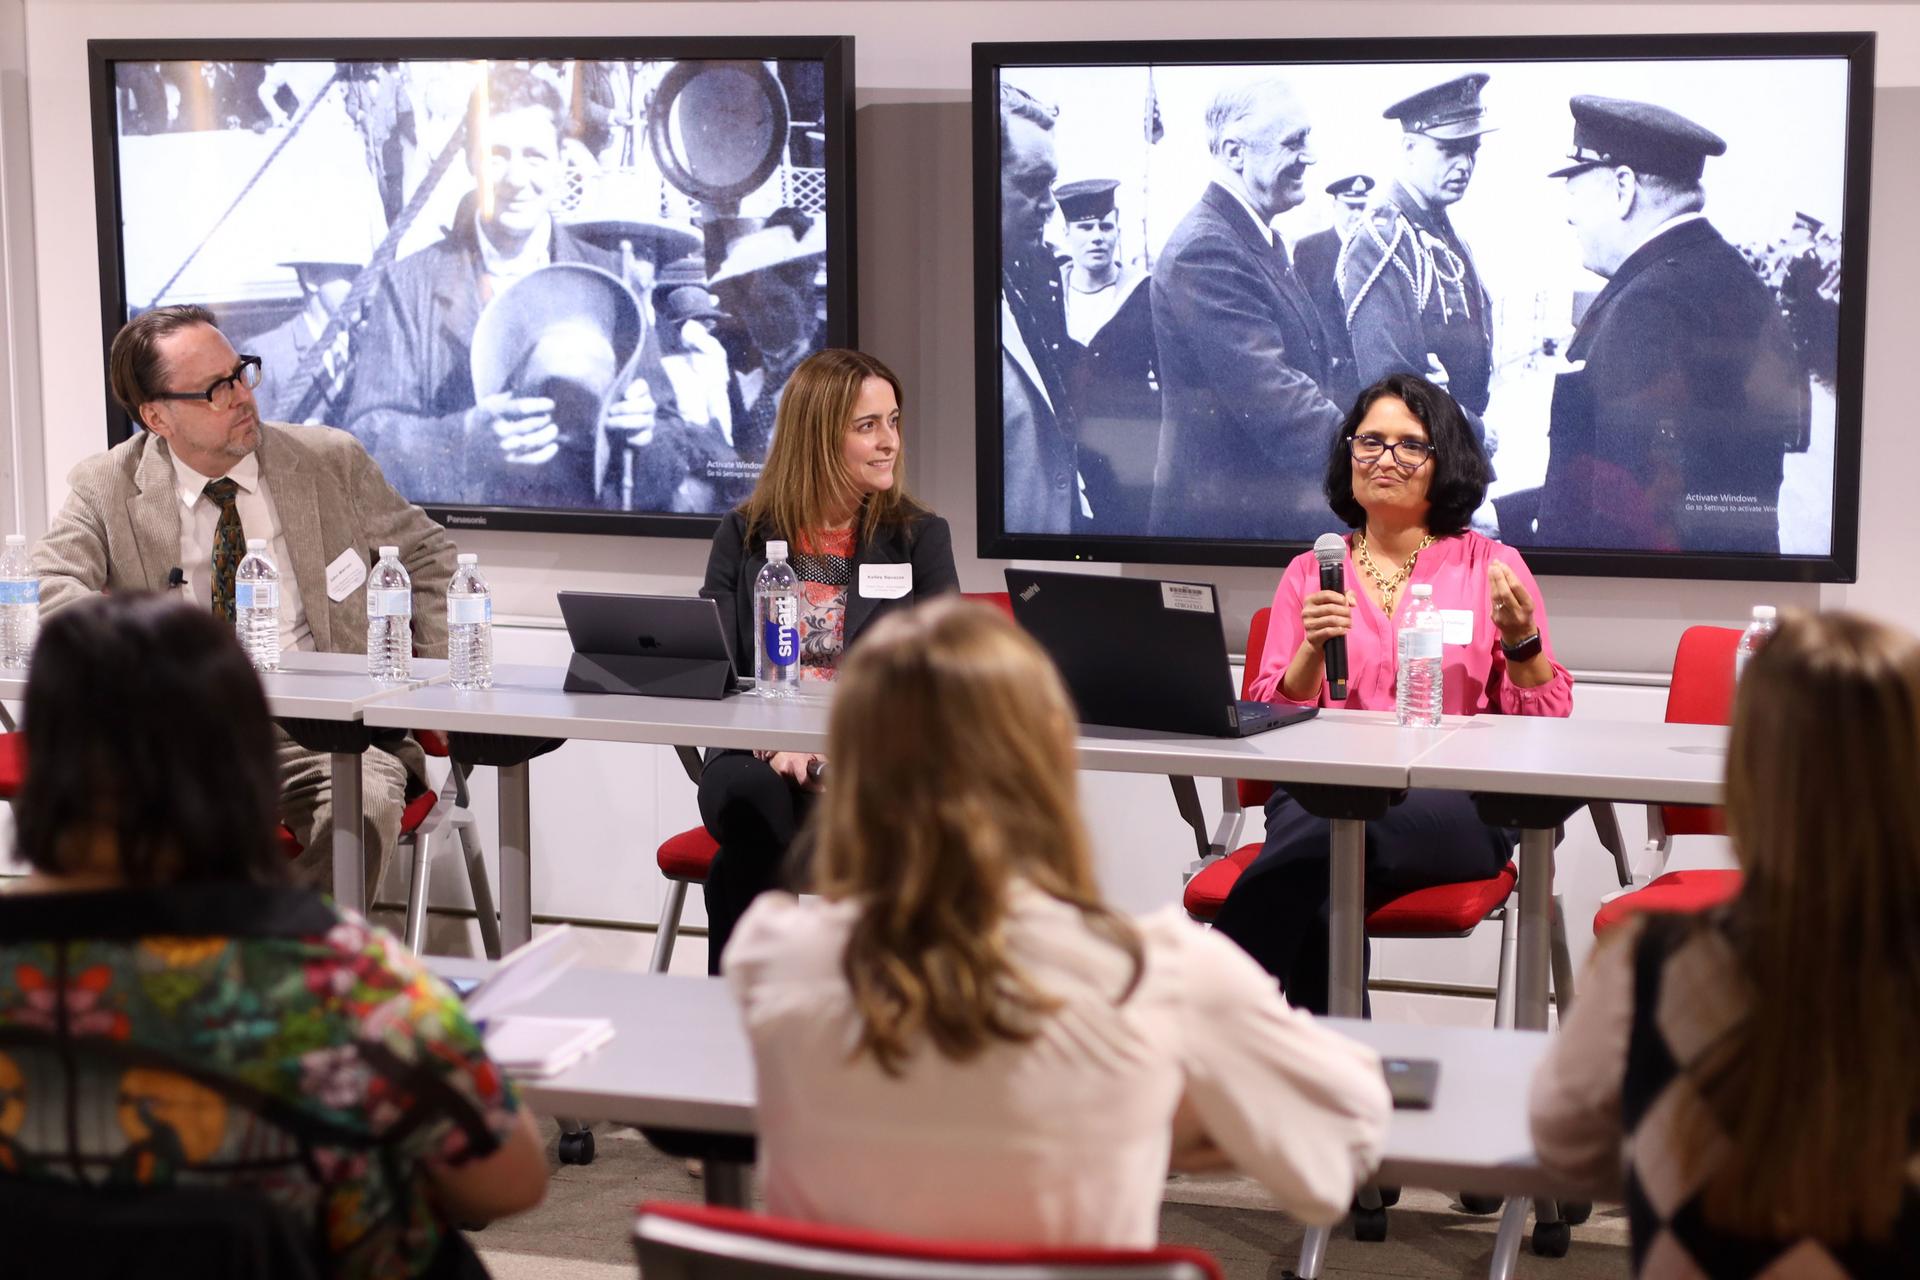 From left, moderator John Warren asked panelists Kelley Squazzo and Swapna Padhye to share their publishing expertise.